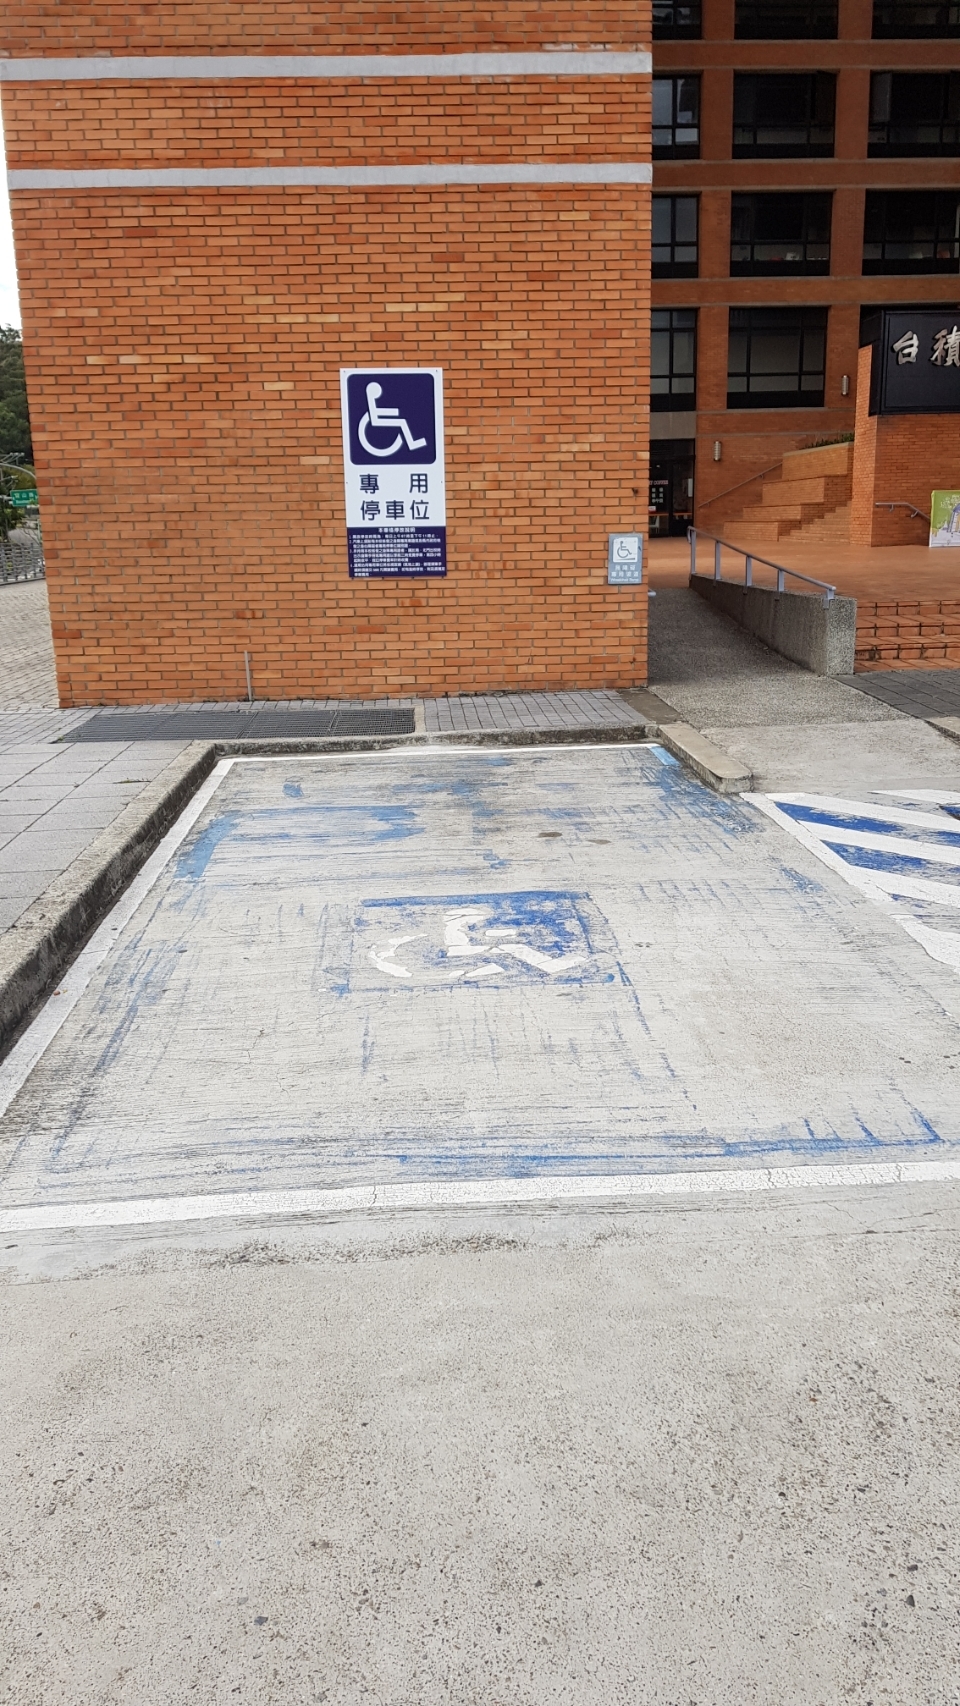 Accessible parking space 3